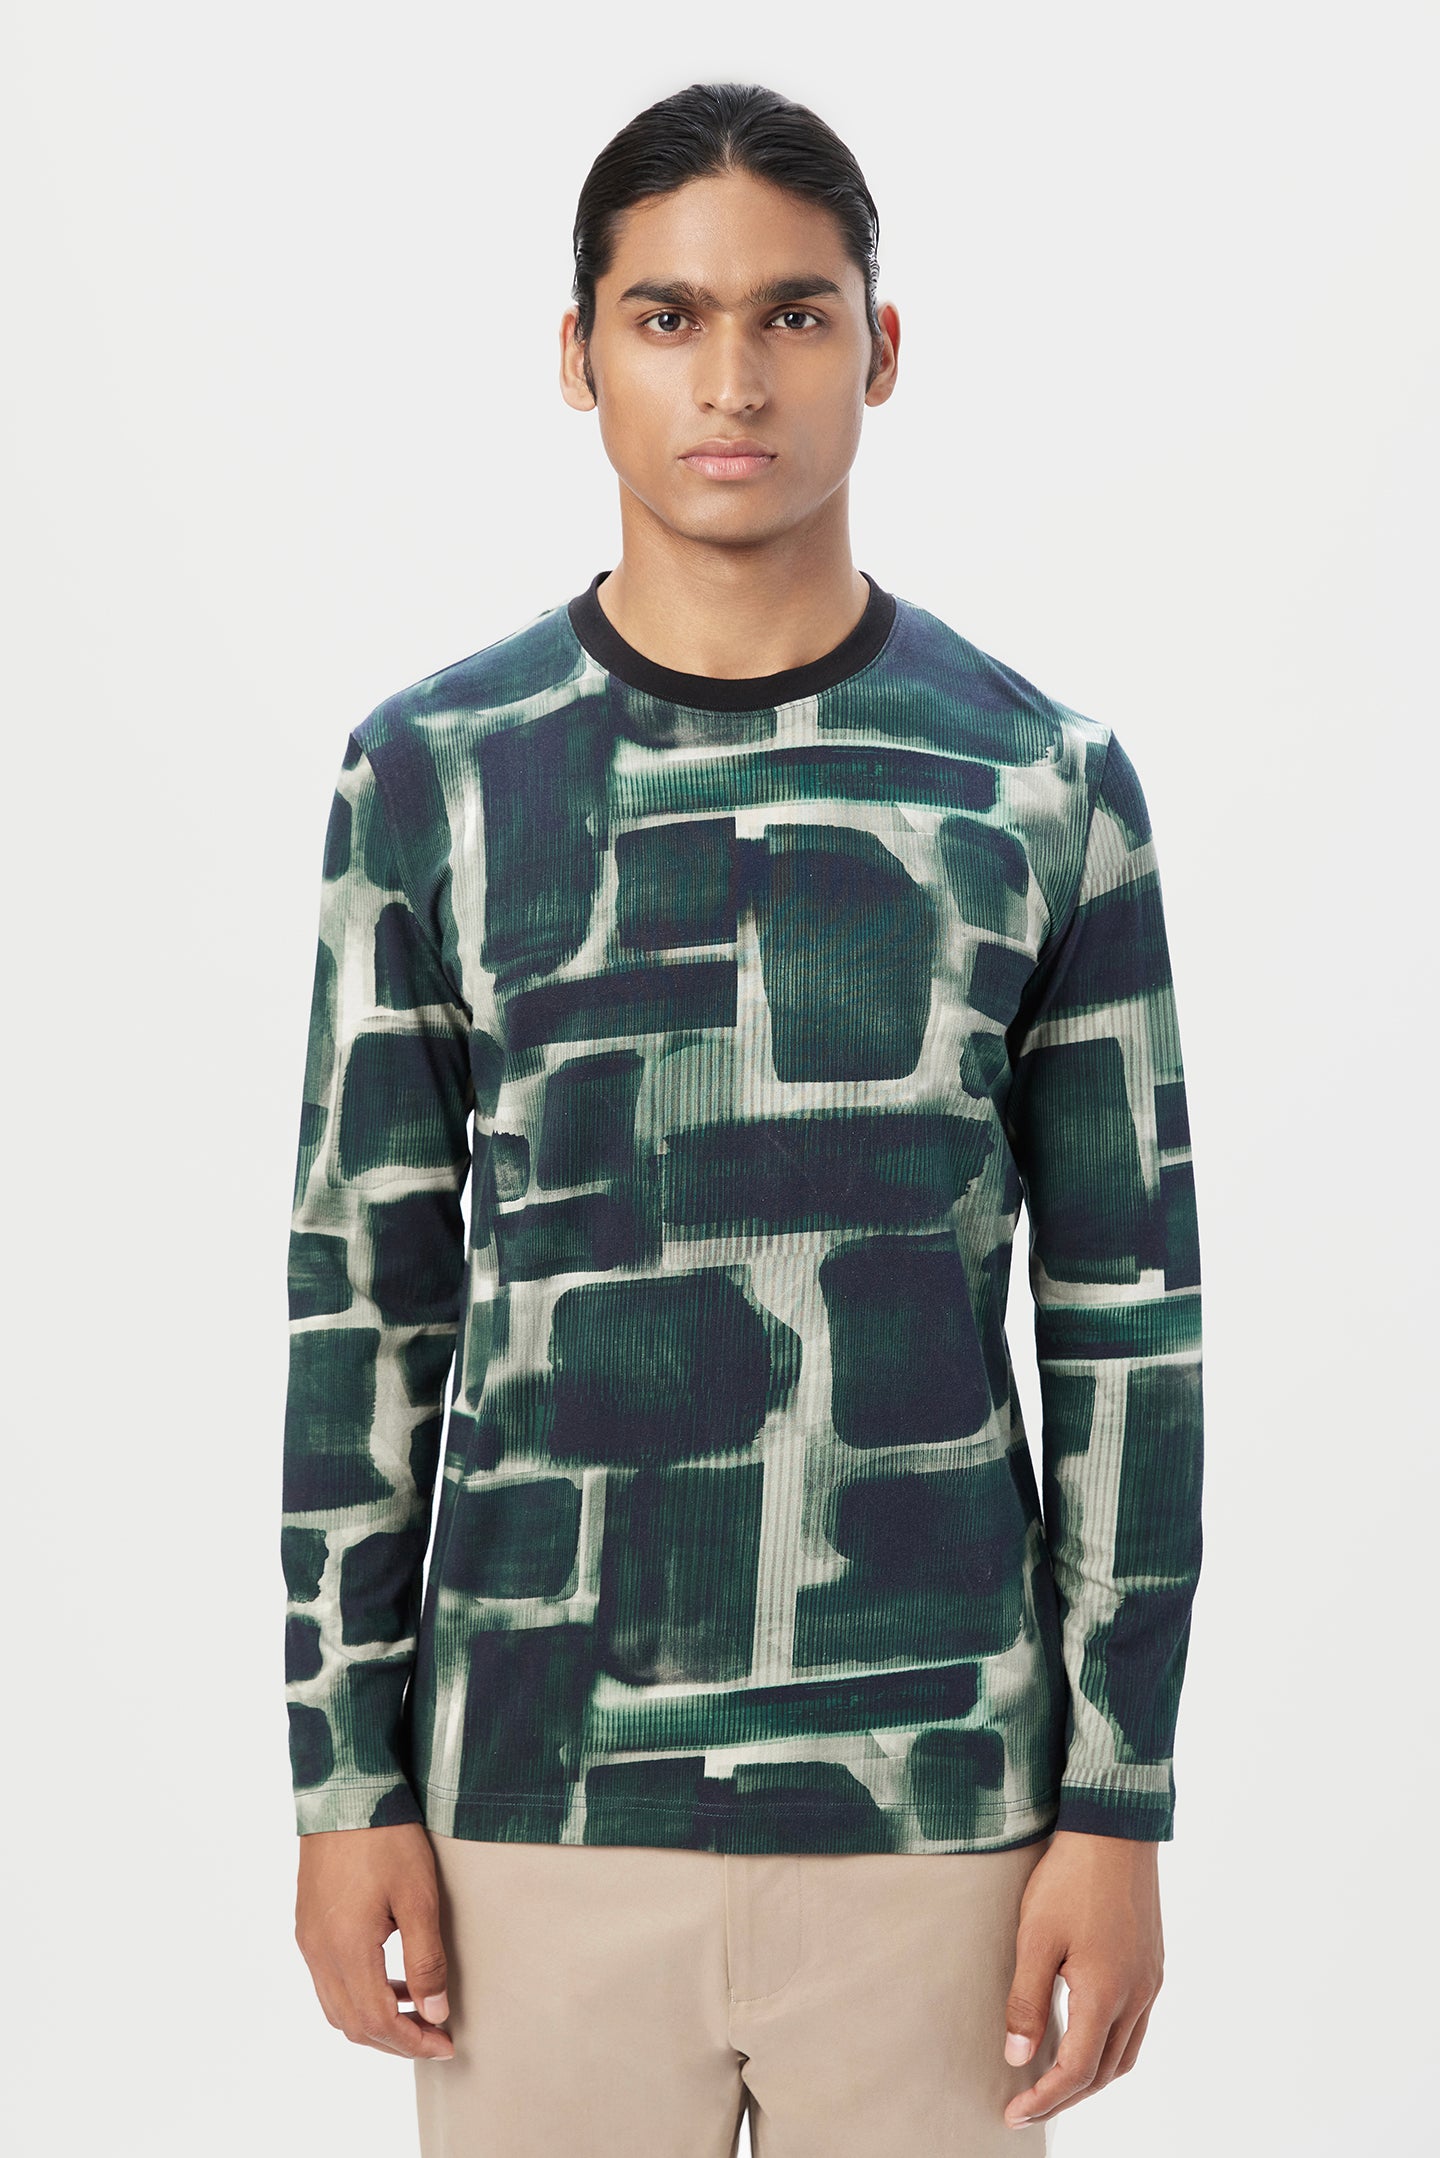 Regular Fit Full Sleeve T-Shirt in All-Over Abstract Print